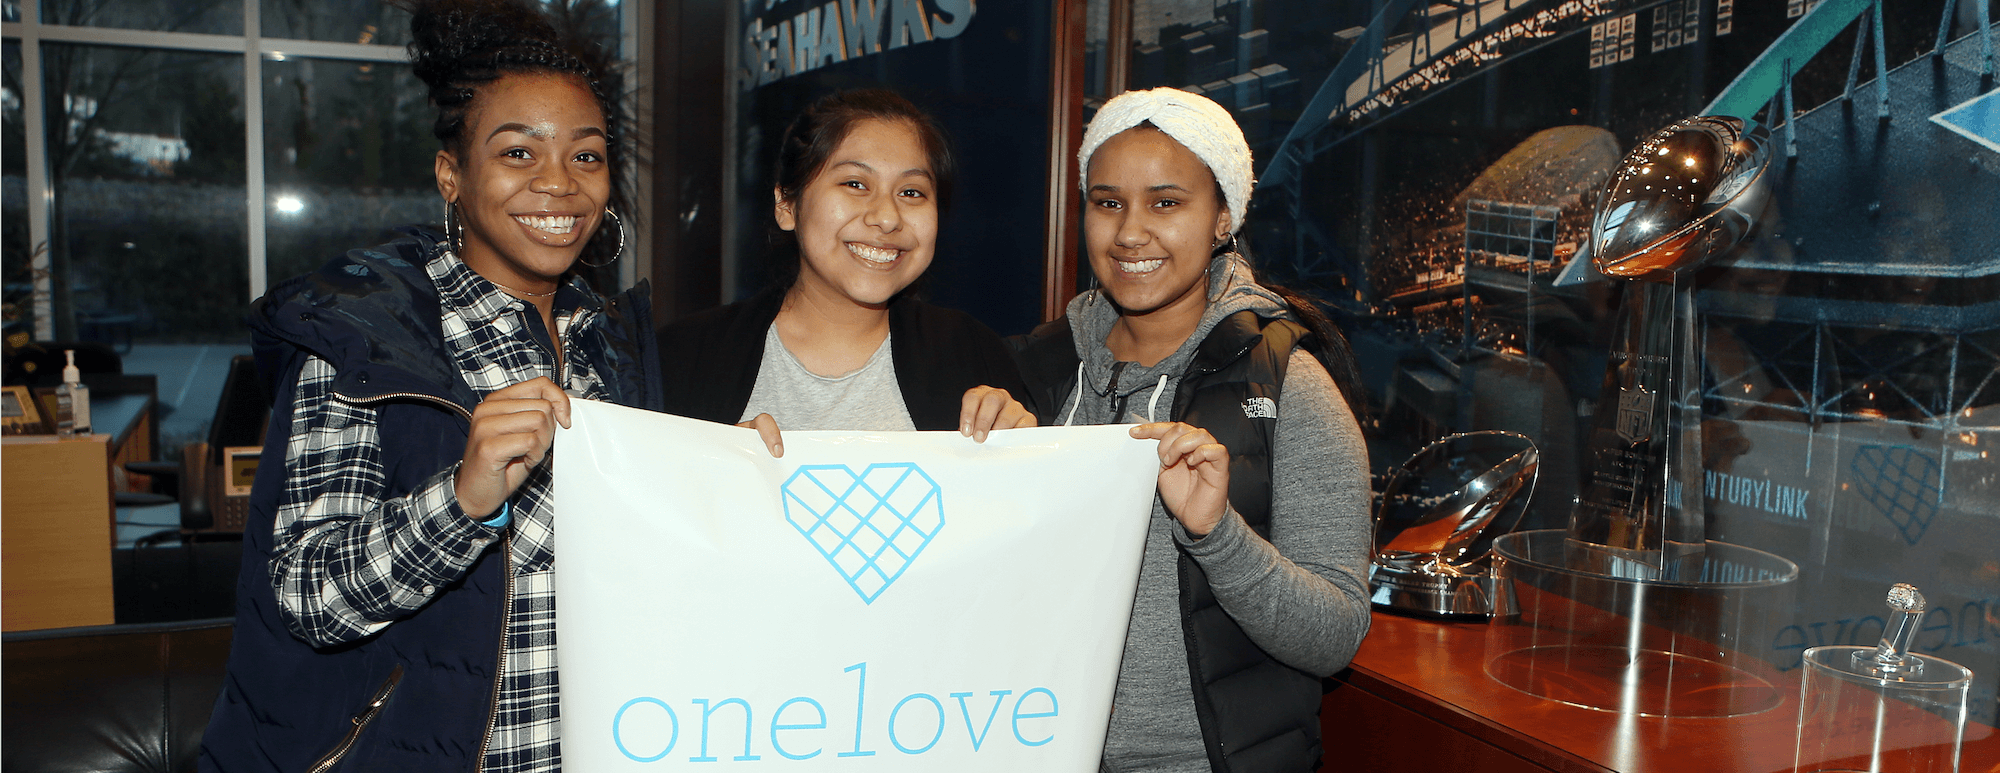 ONE LOVE ANNOUNCES CERTIFICATION PROGRAM FOR SCHOOLS LEADING RELATIONSHIP HEALTH CURRICULA